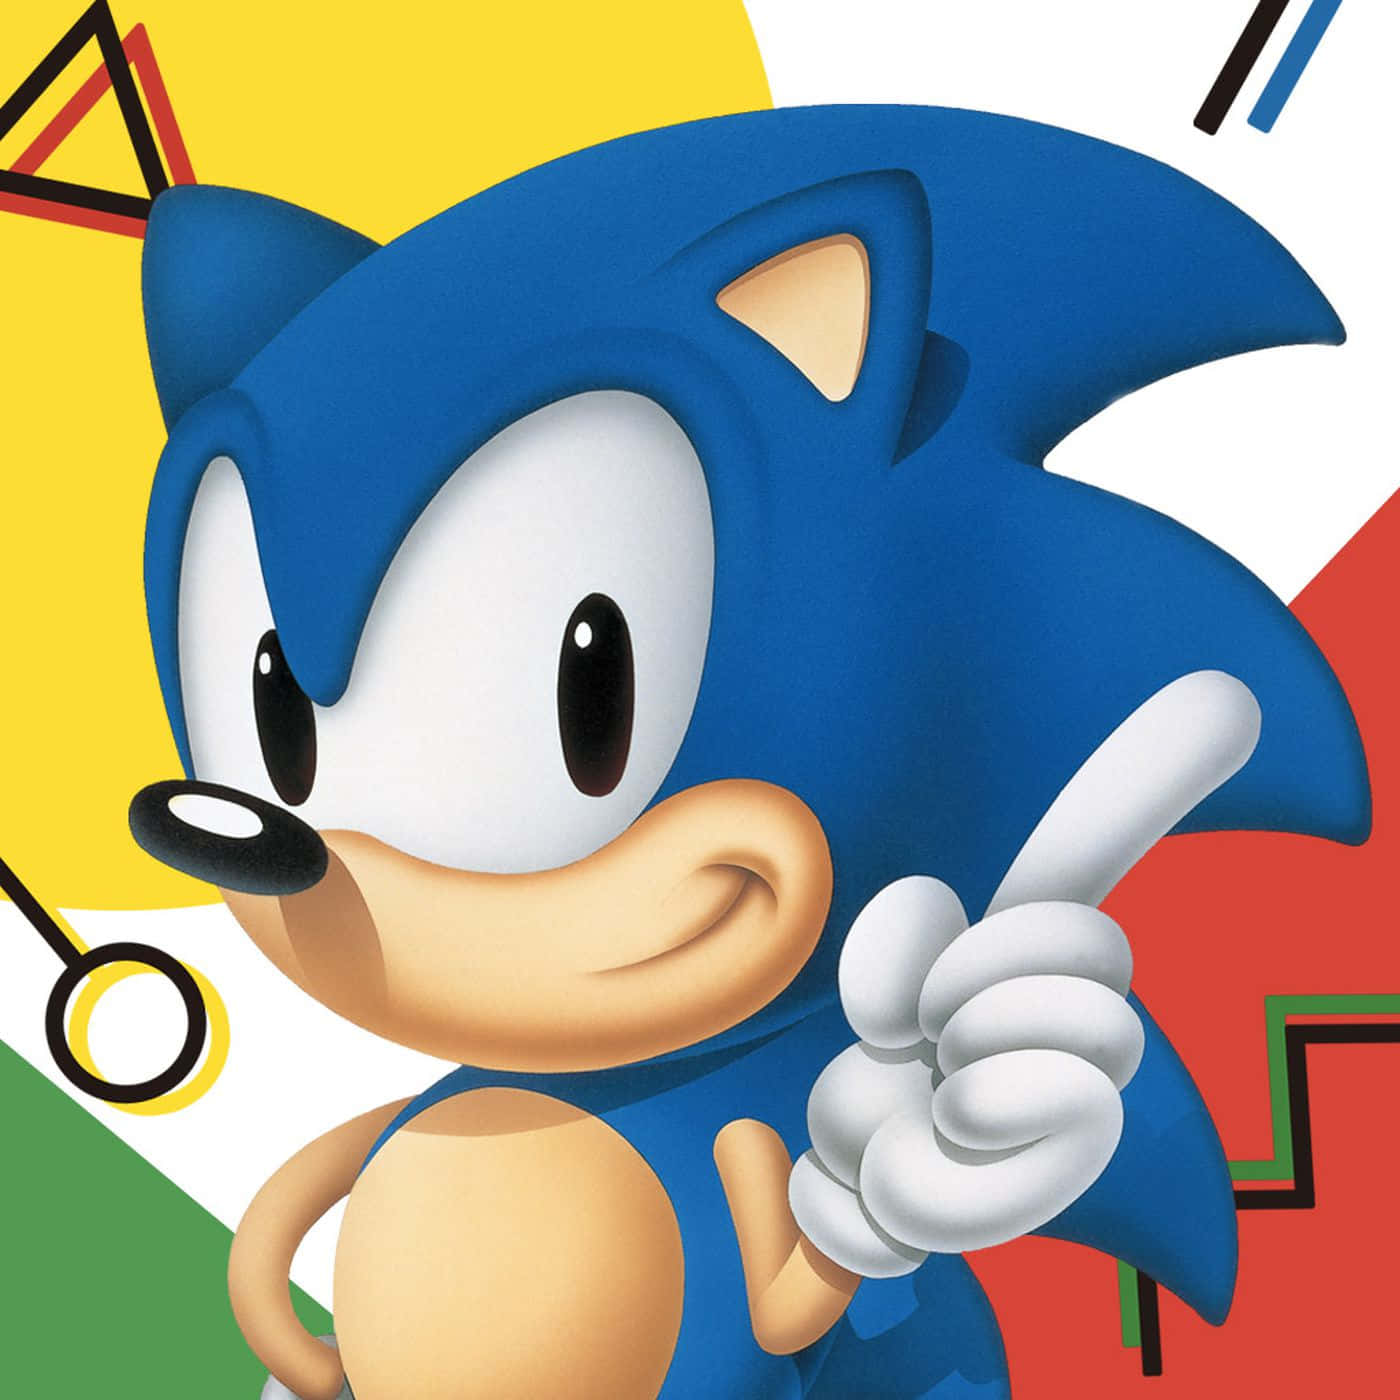 Sonic The Hedgehog, Ready to Race.